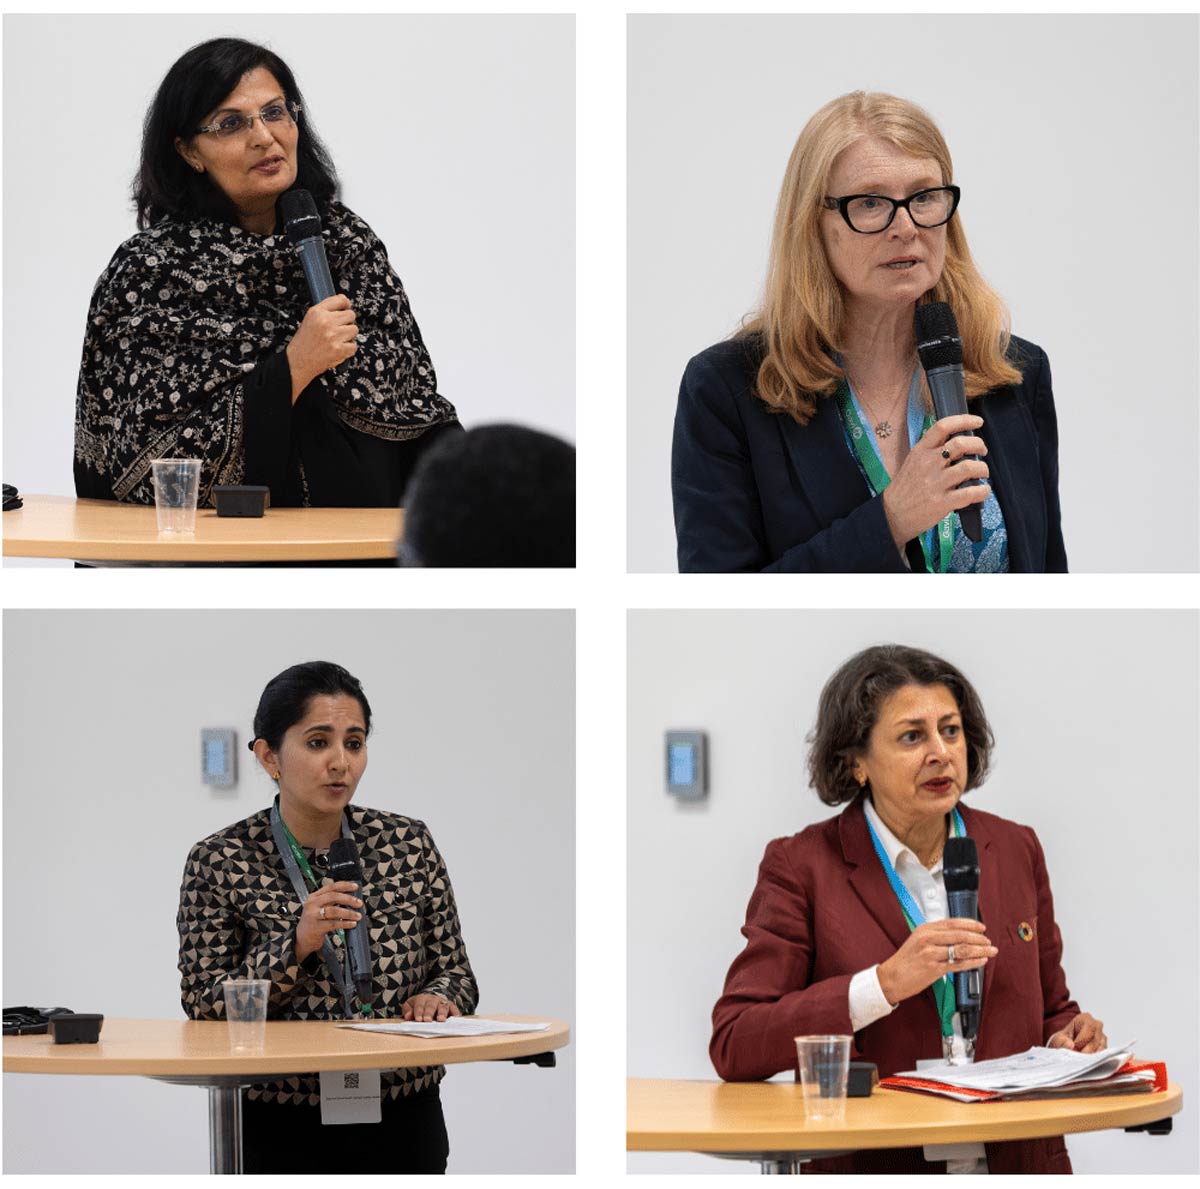 From top left: Dr Sania Nishtar, CEO of Gavi the Vaccine Alliance; Beth Arthy, UK Deputy Permanent Representative (Global Health) at the UK Mission in Geneva; Dr. Yashodhara Rana, Associate Director of Research at ECF; Afshan Khan, UN Assistant Secretary General and Scaling Up Nutrition (SUN) Movement Coordinator